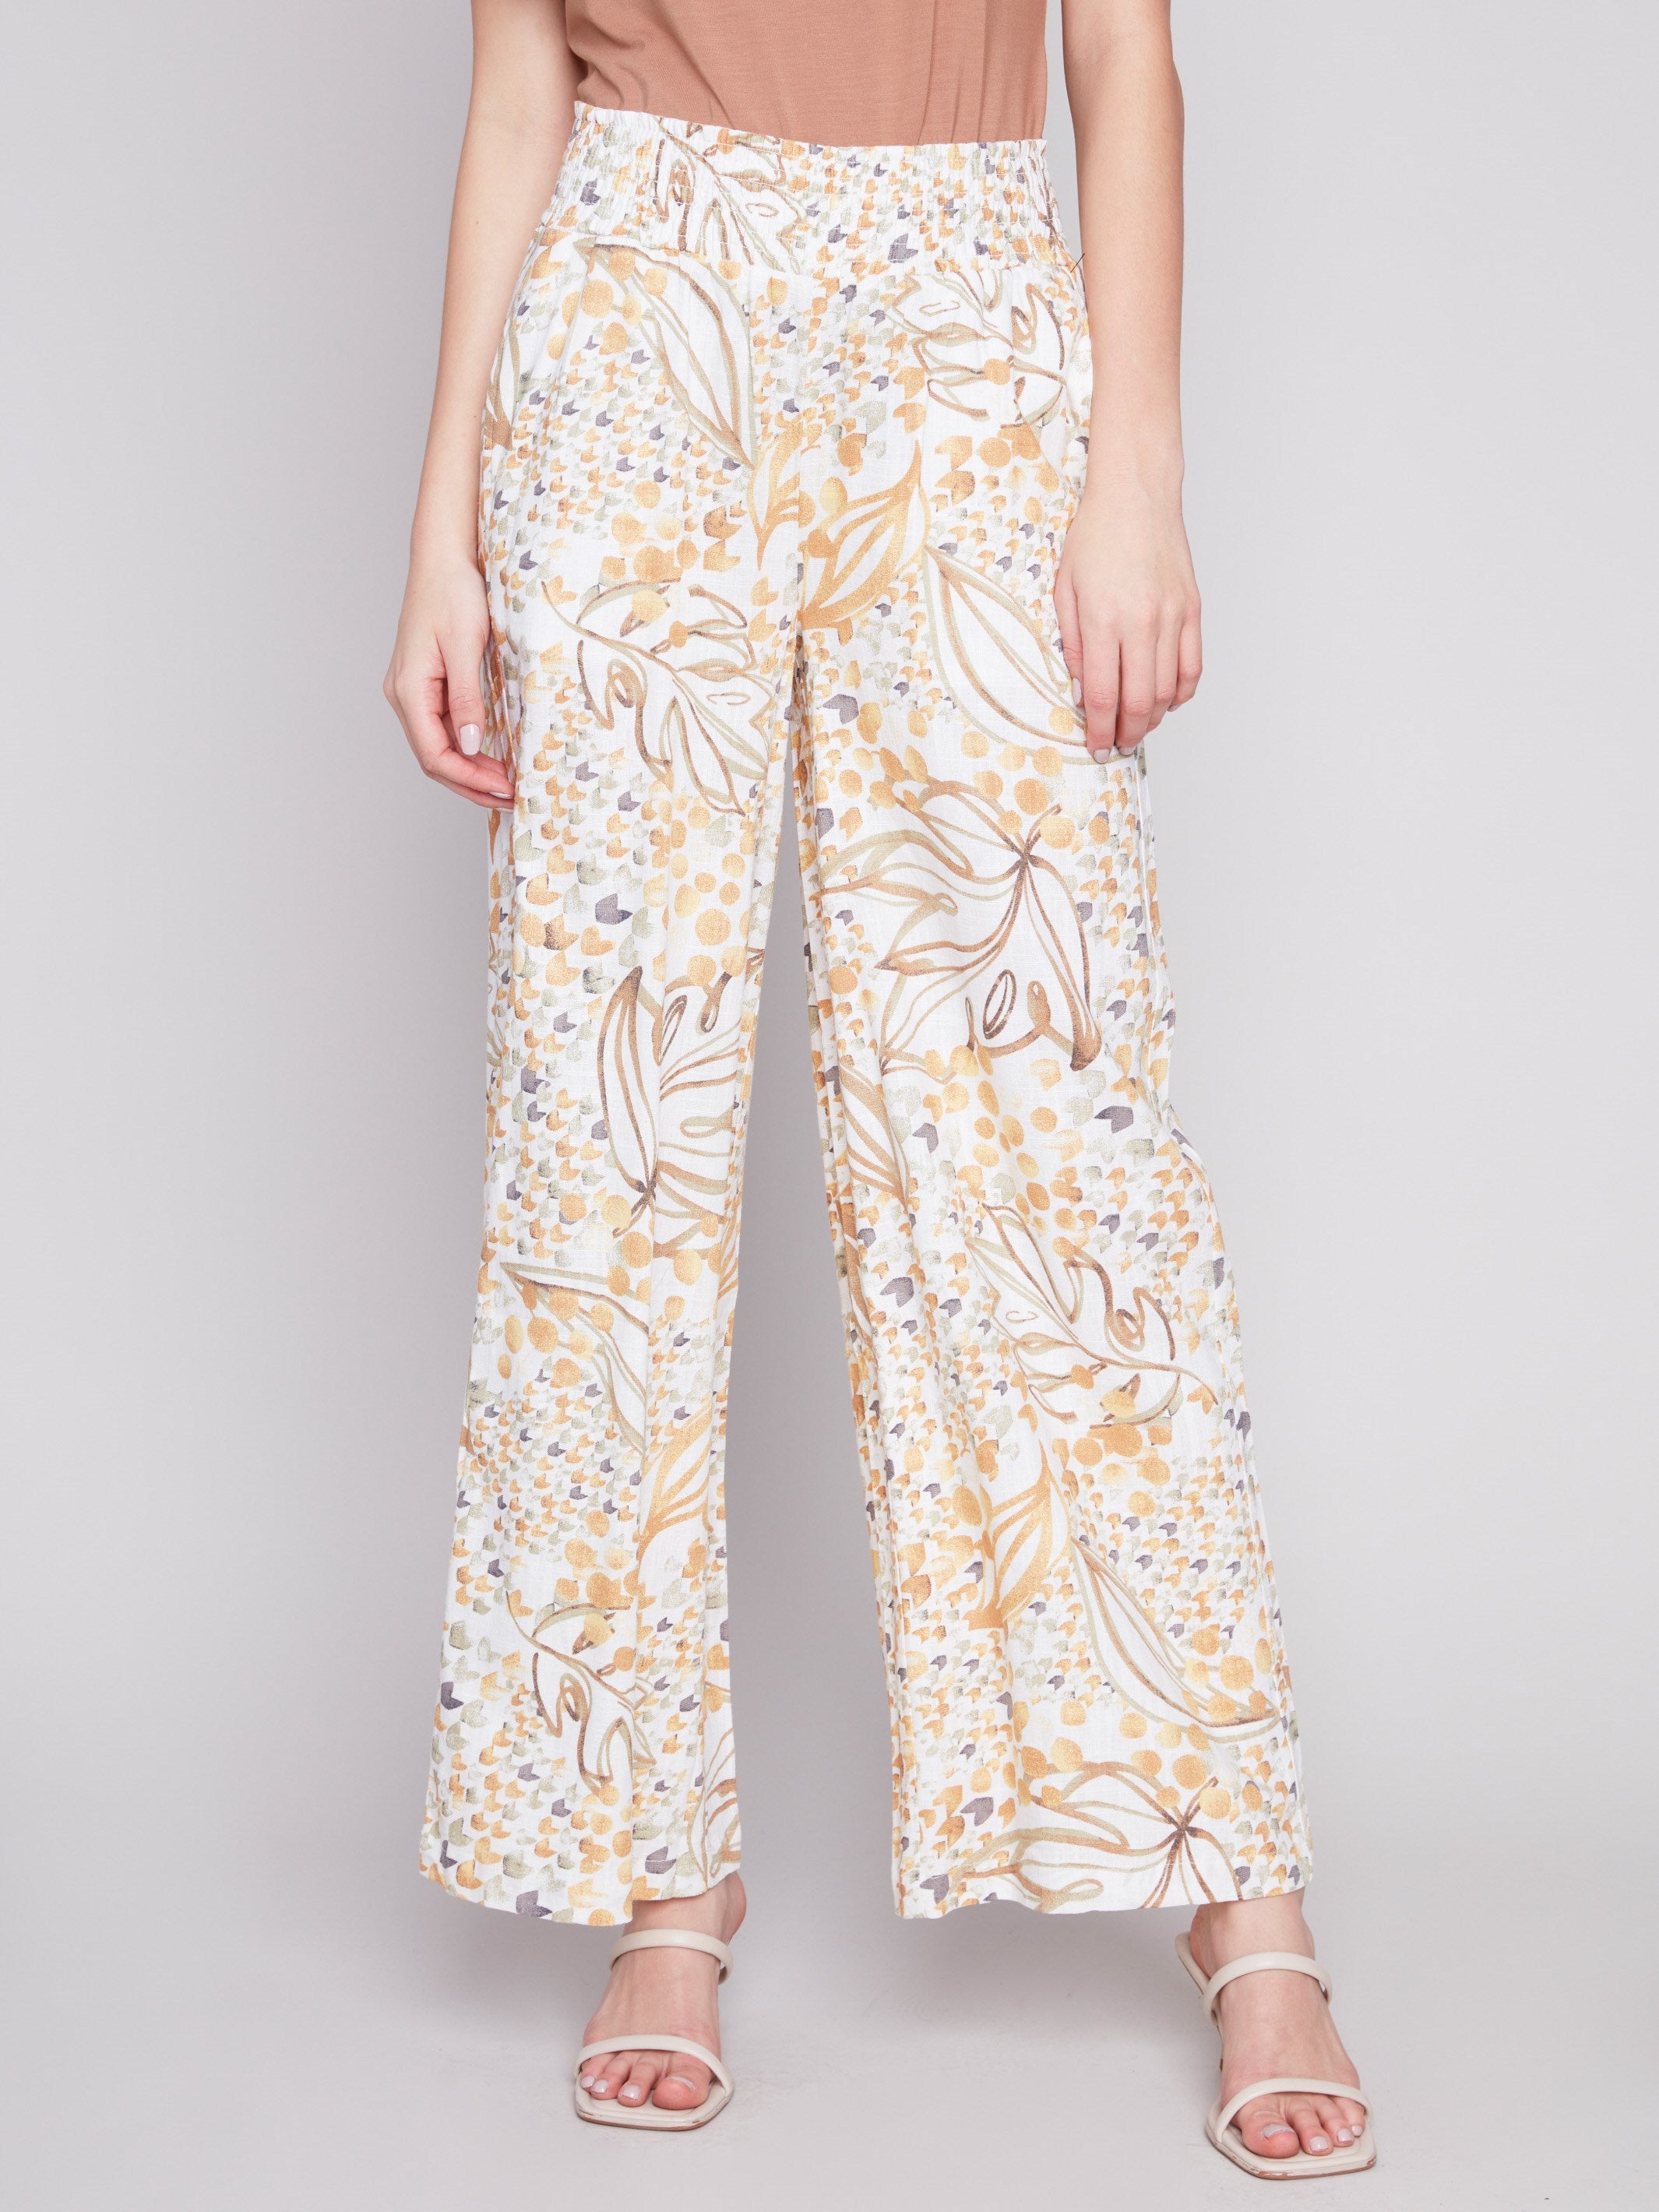 Printed Elastic Waist Pull-On Pants - Dune - Charlie B Collection Canada - Image 2